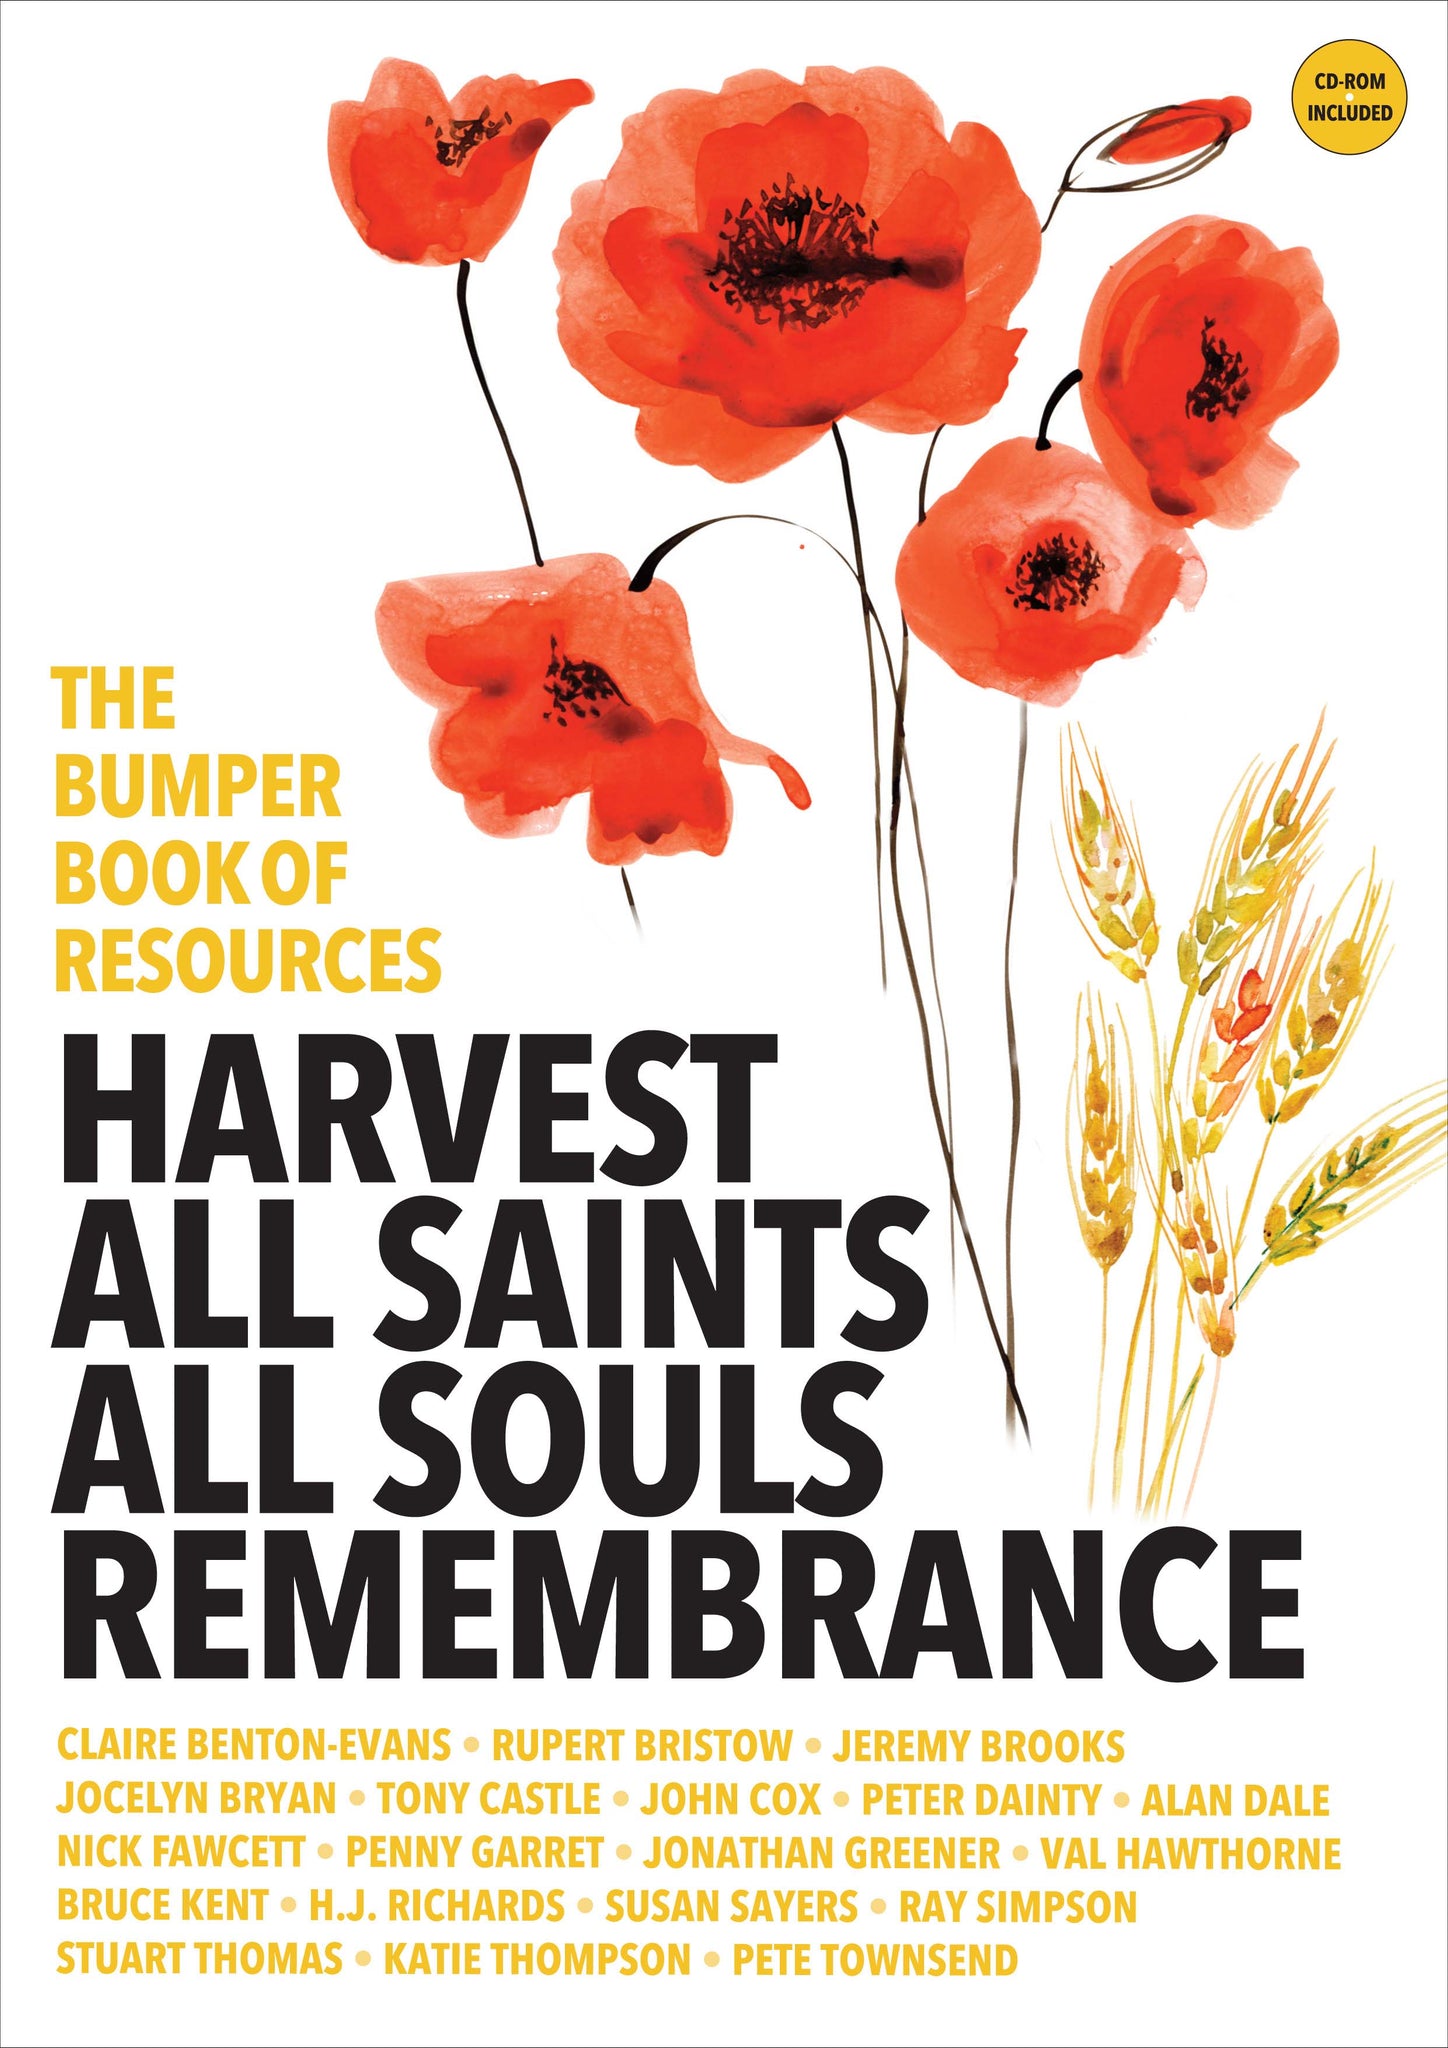 The Bumper Book Of Resources: Harvest, All Saints, All Souls, (Volume 1)The Bumper Book Of Resources: Harvest, All Saints, All Souls, (Volume 1)